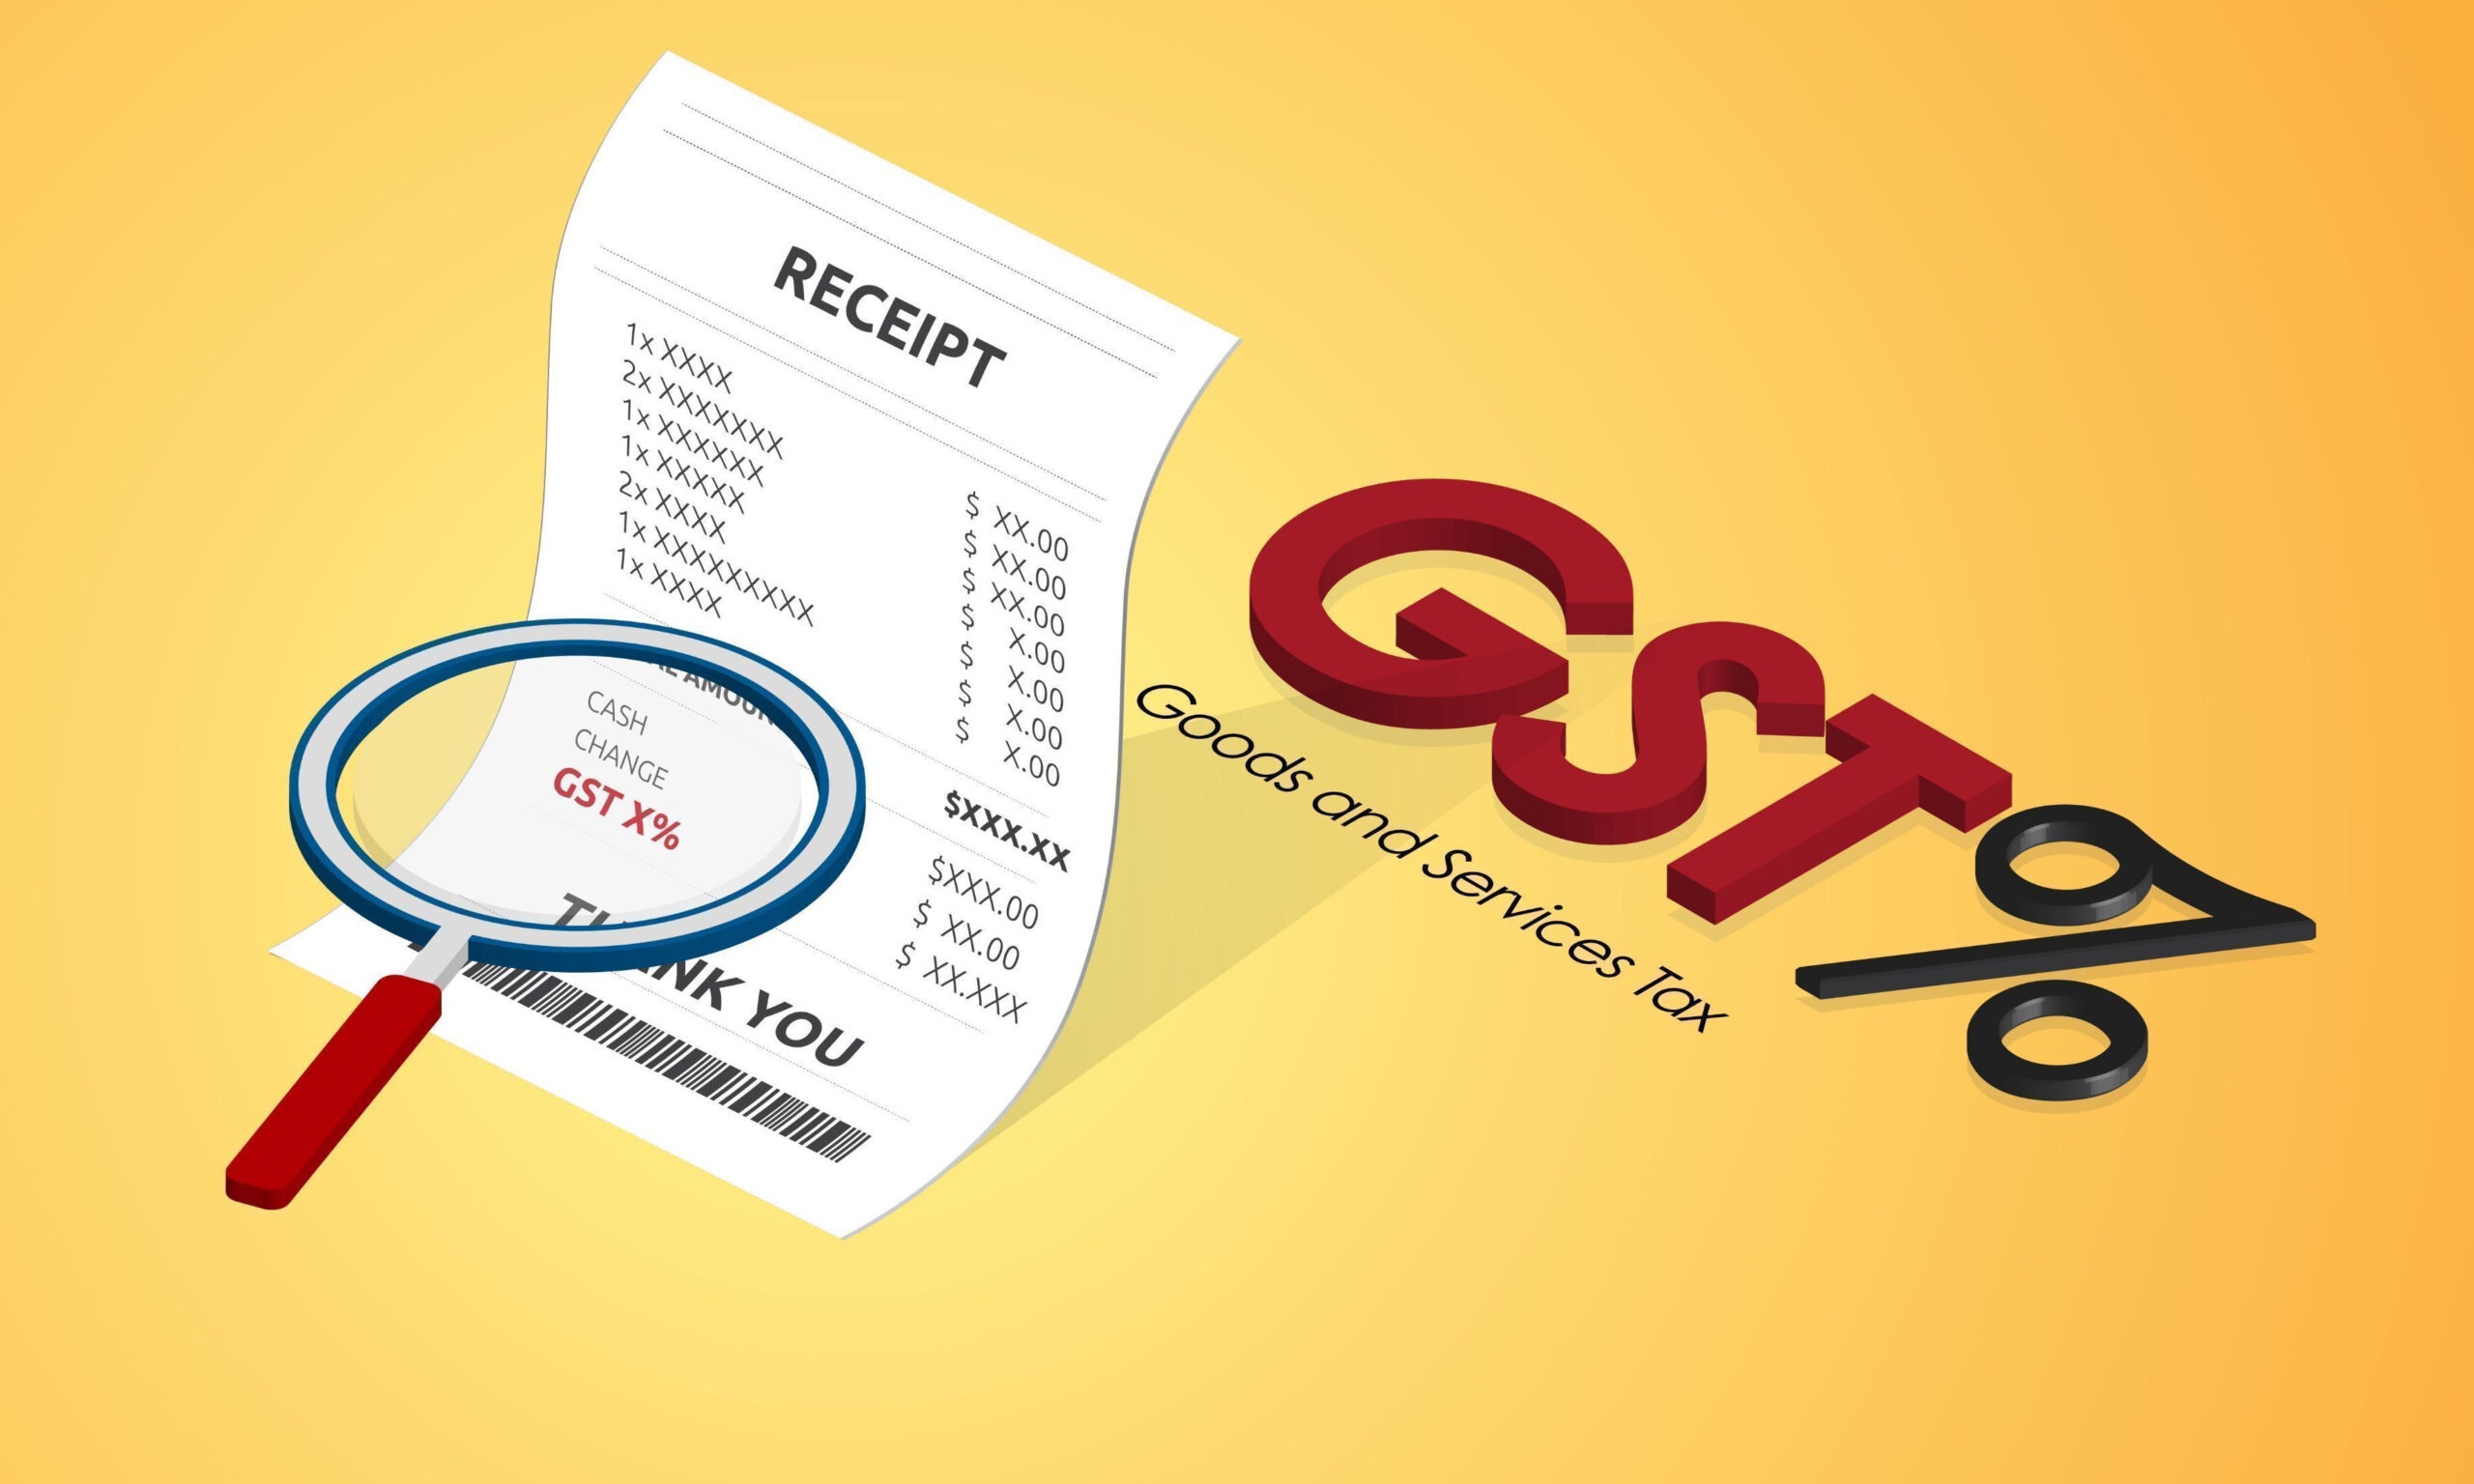 Not Required to pay GST